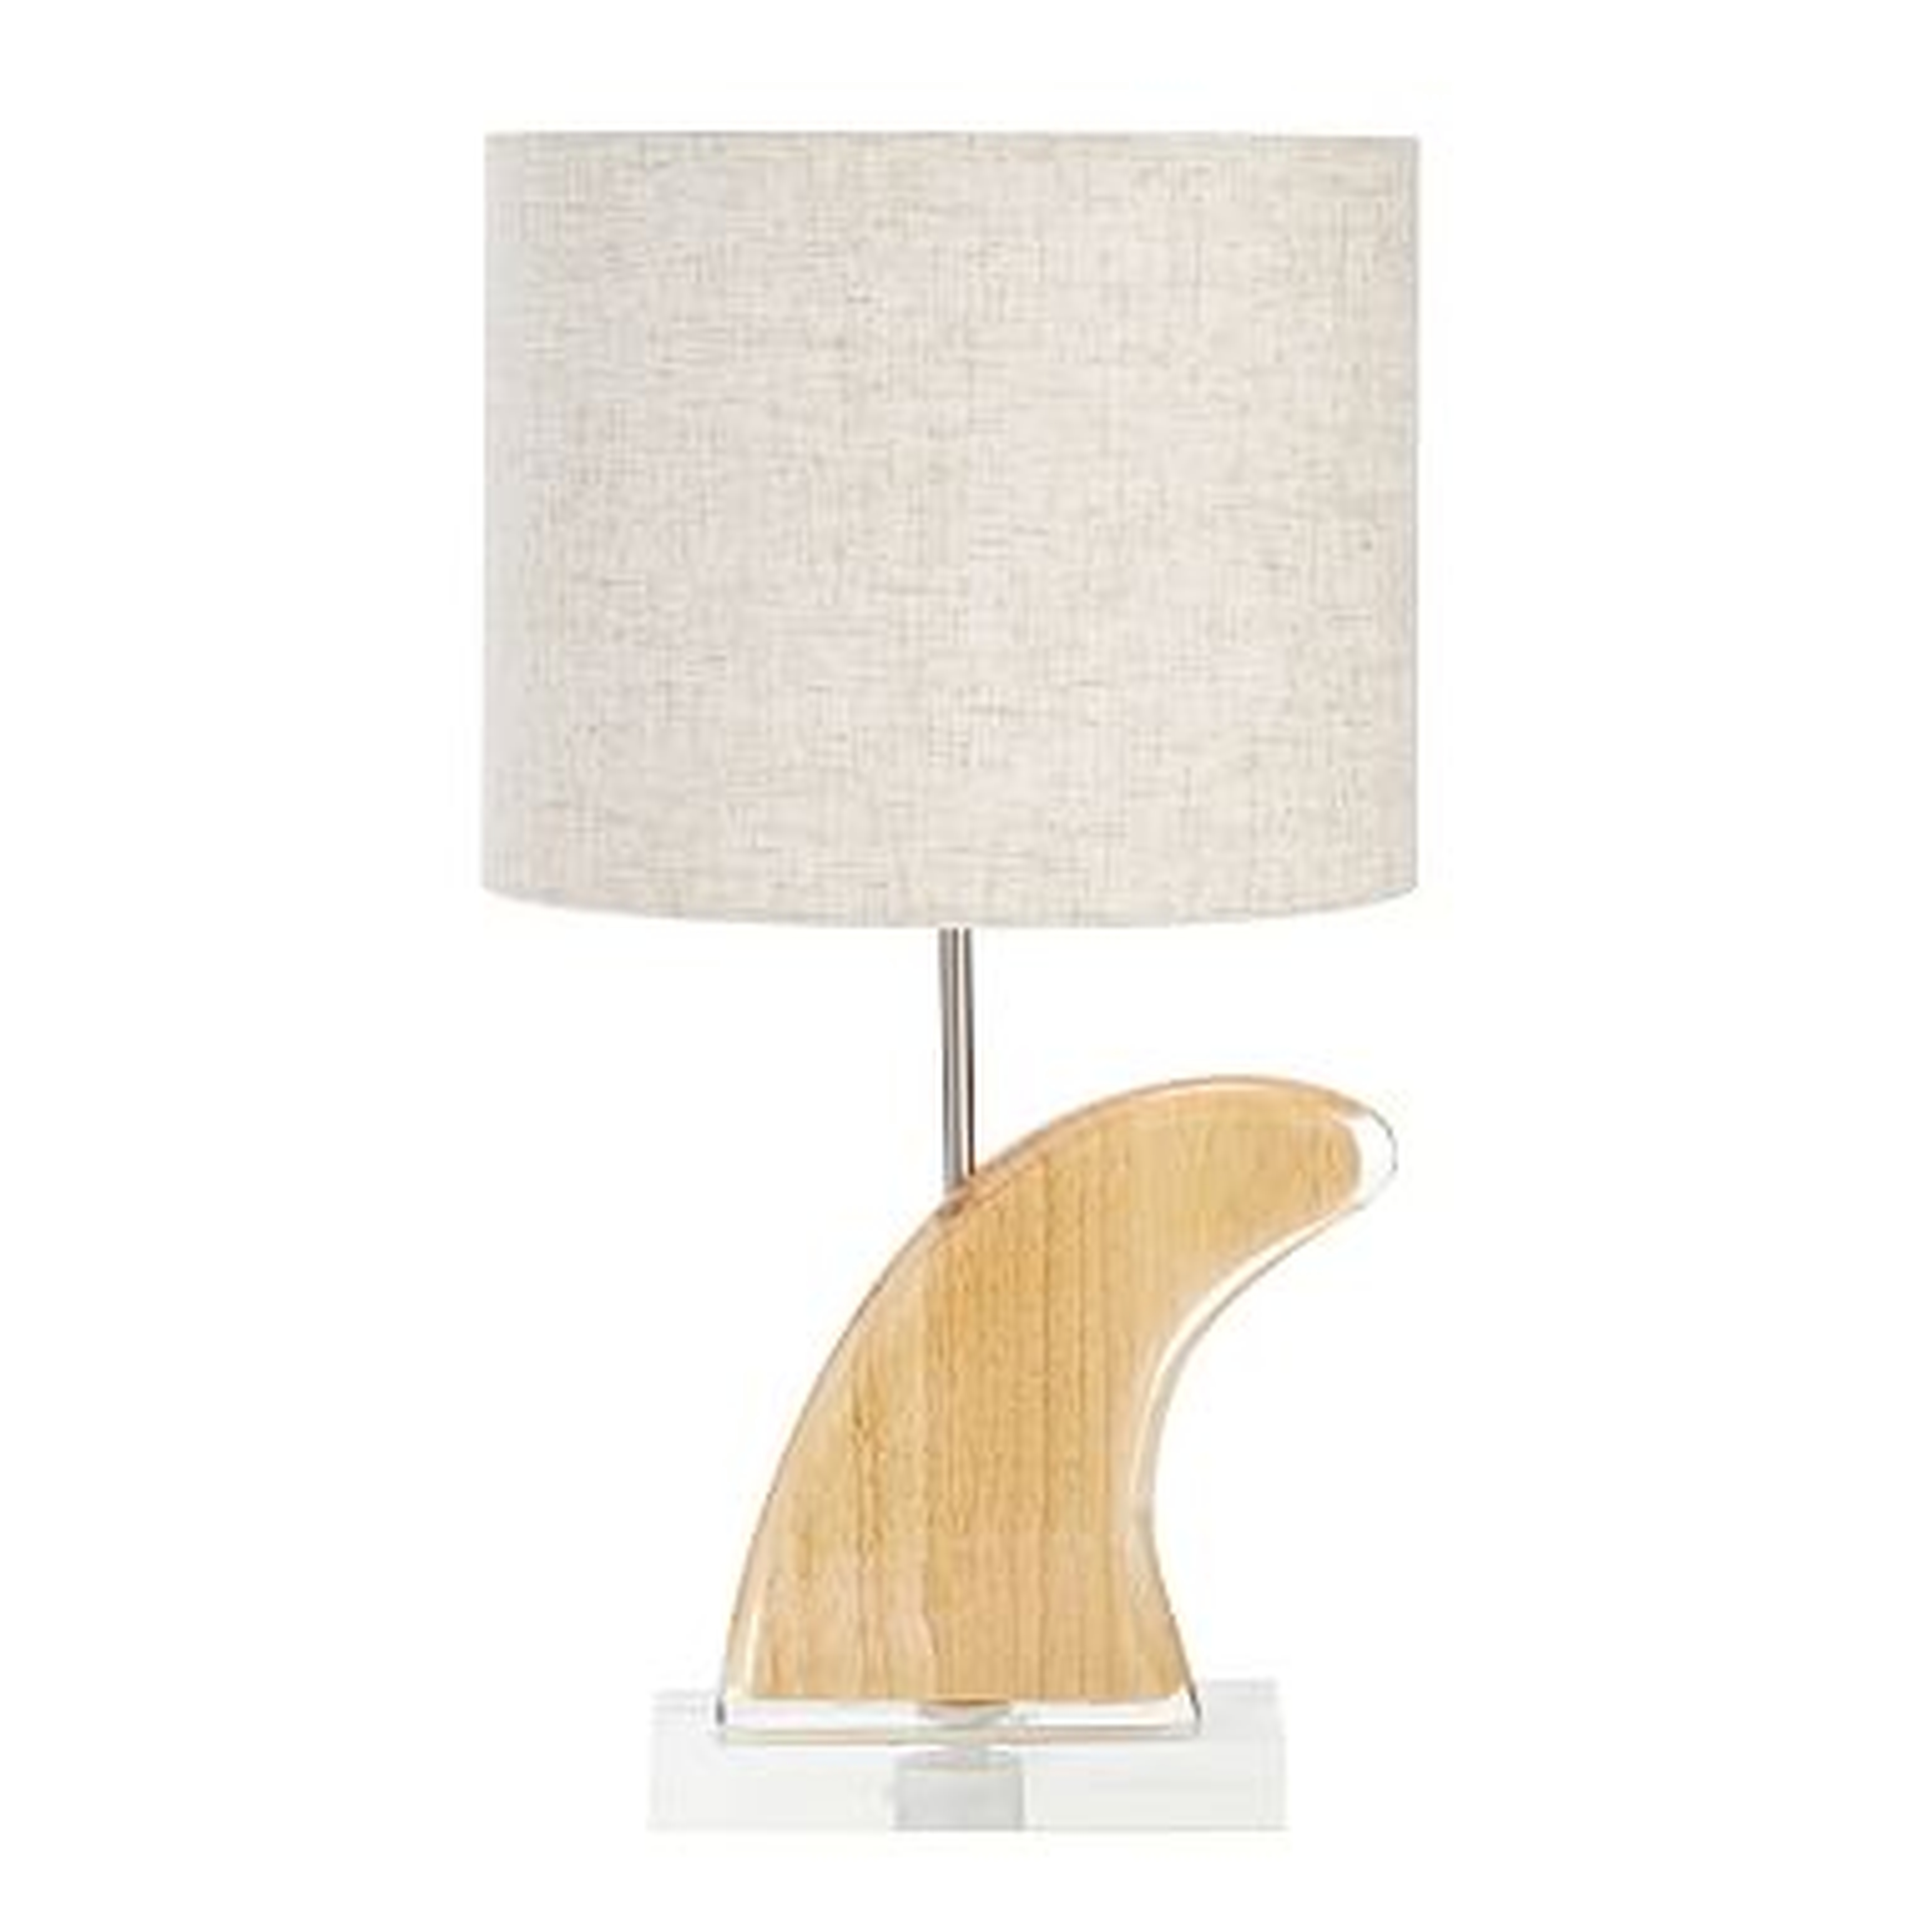 Kelly Slater Wave Resin Table Lamp, Natural - Pottery Barn Teen